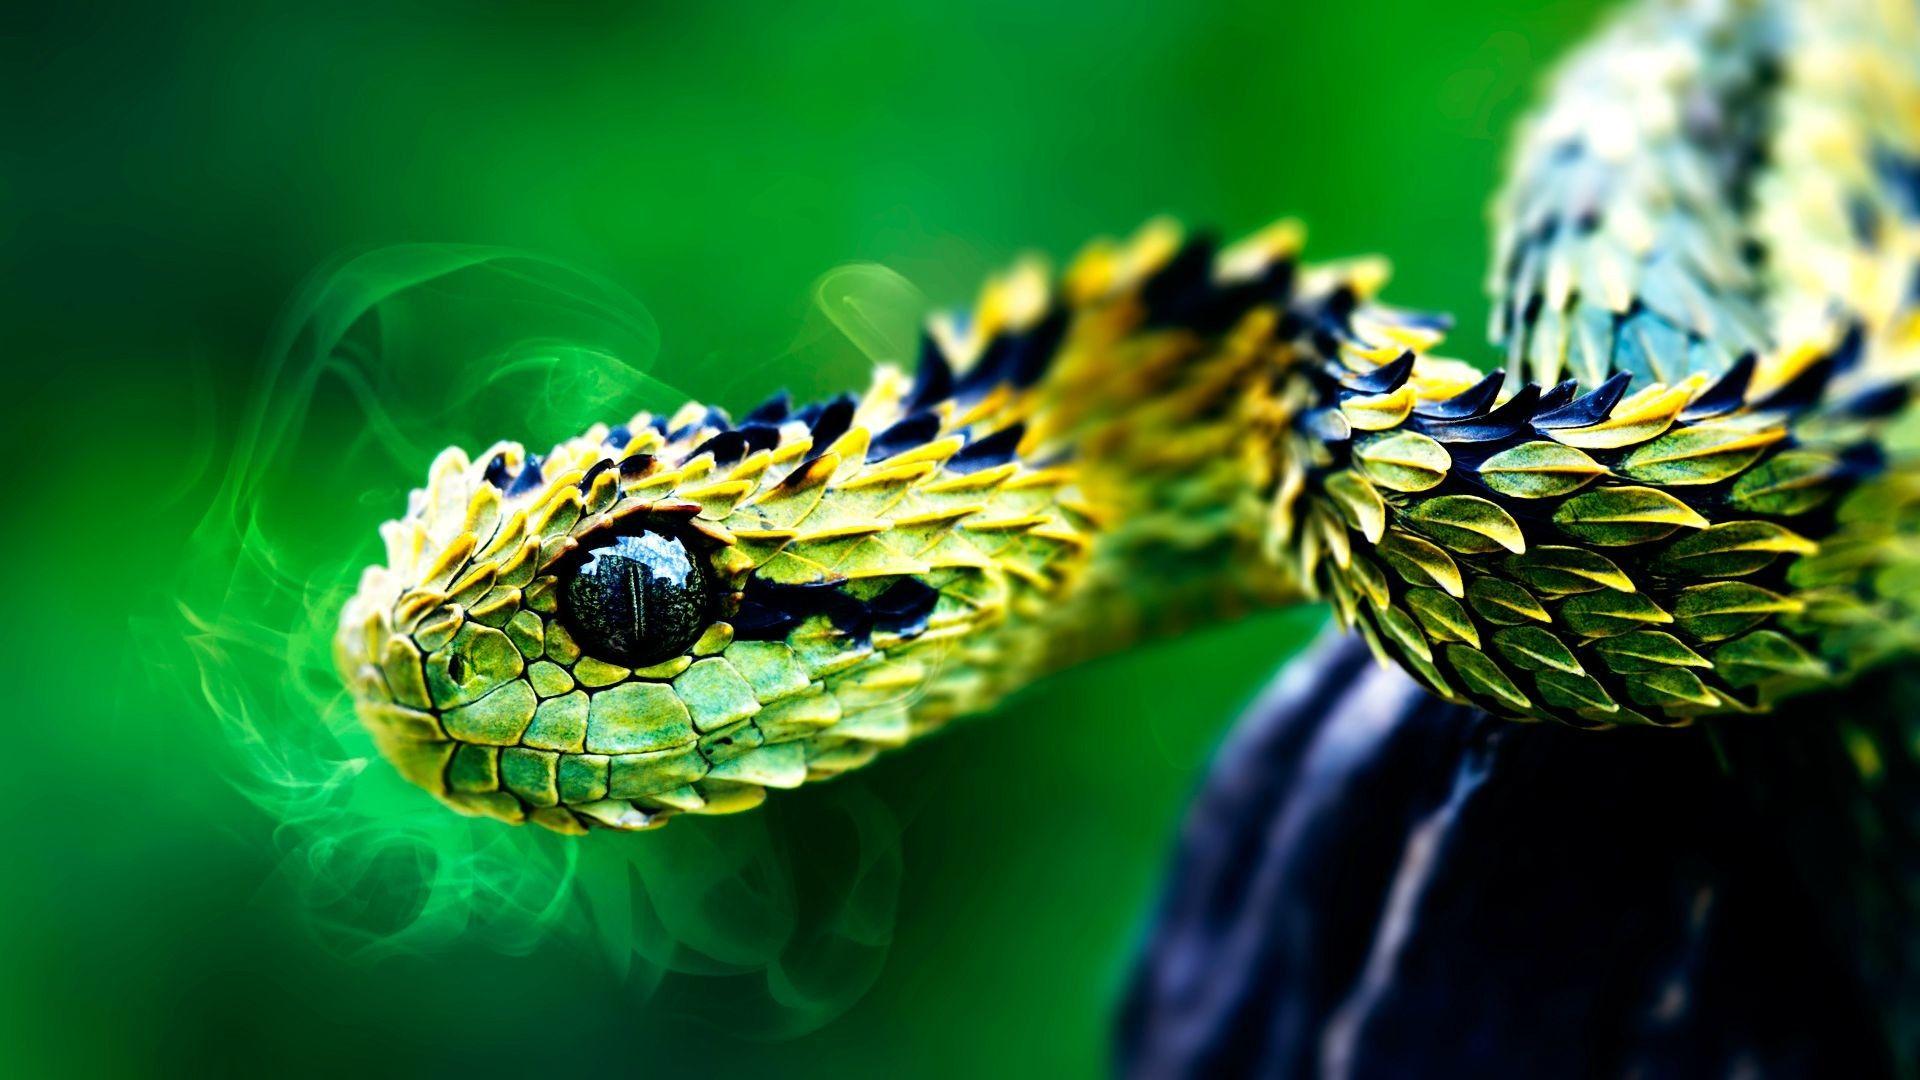 Snake 4K wallpapers for your desktop or mobile screen free and easy to  download